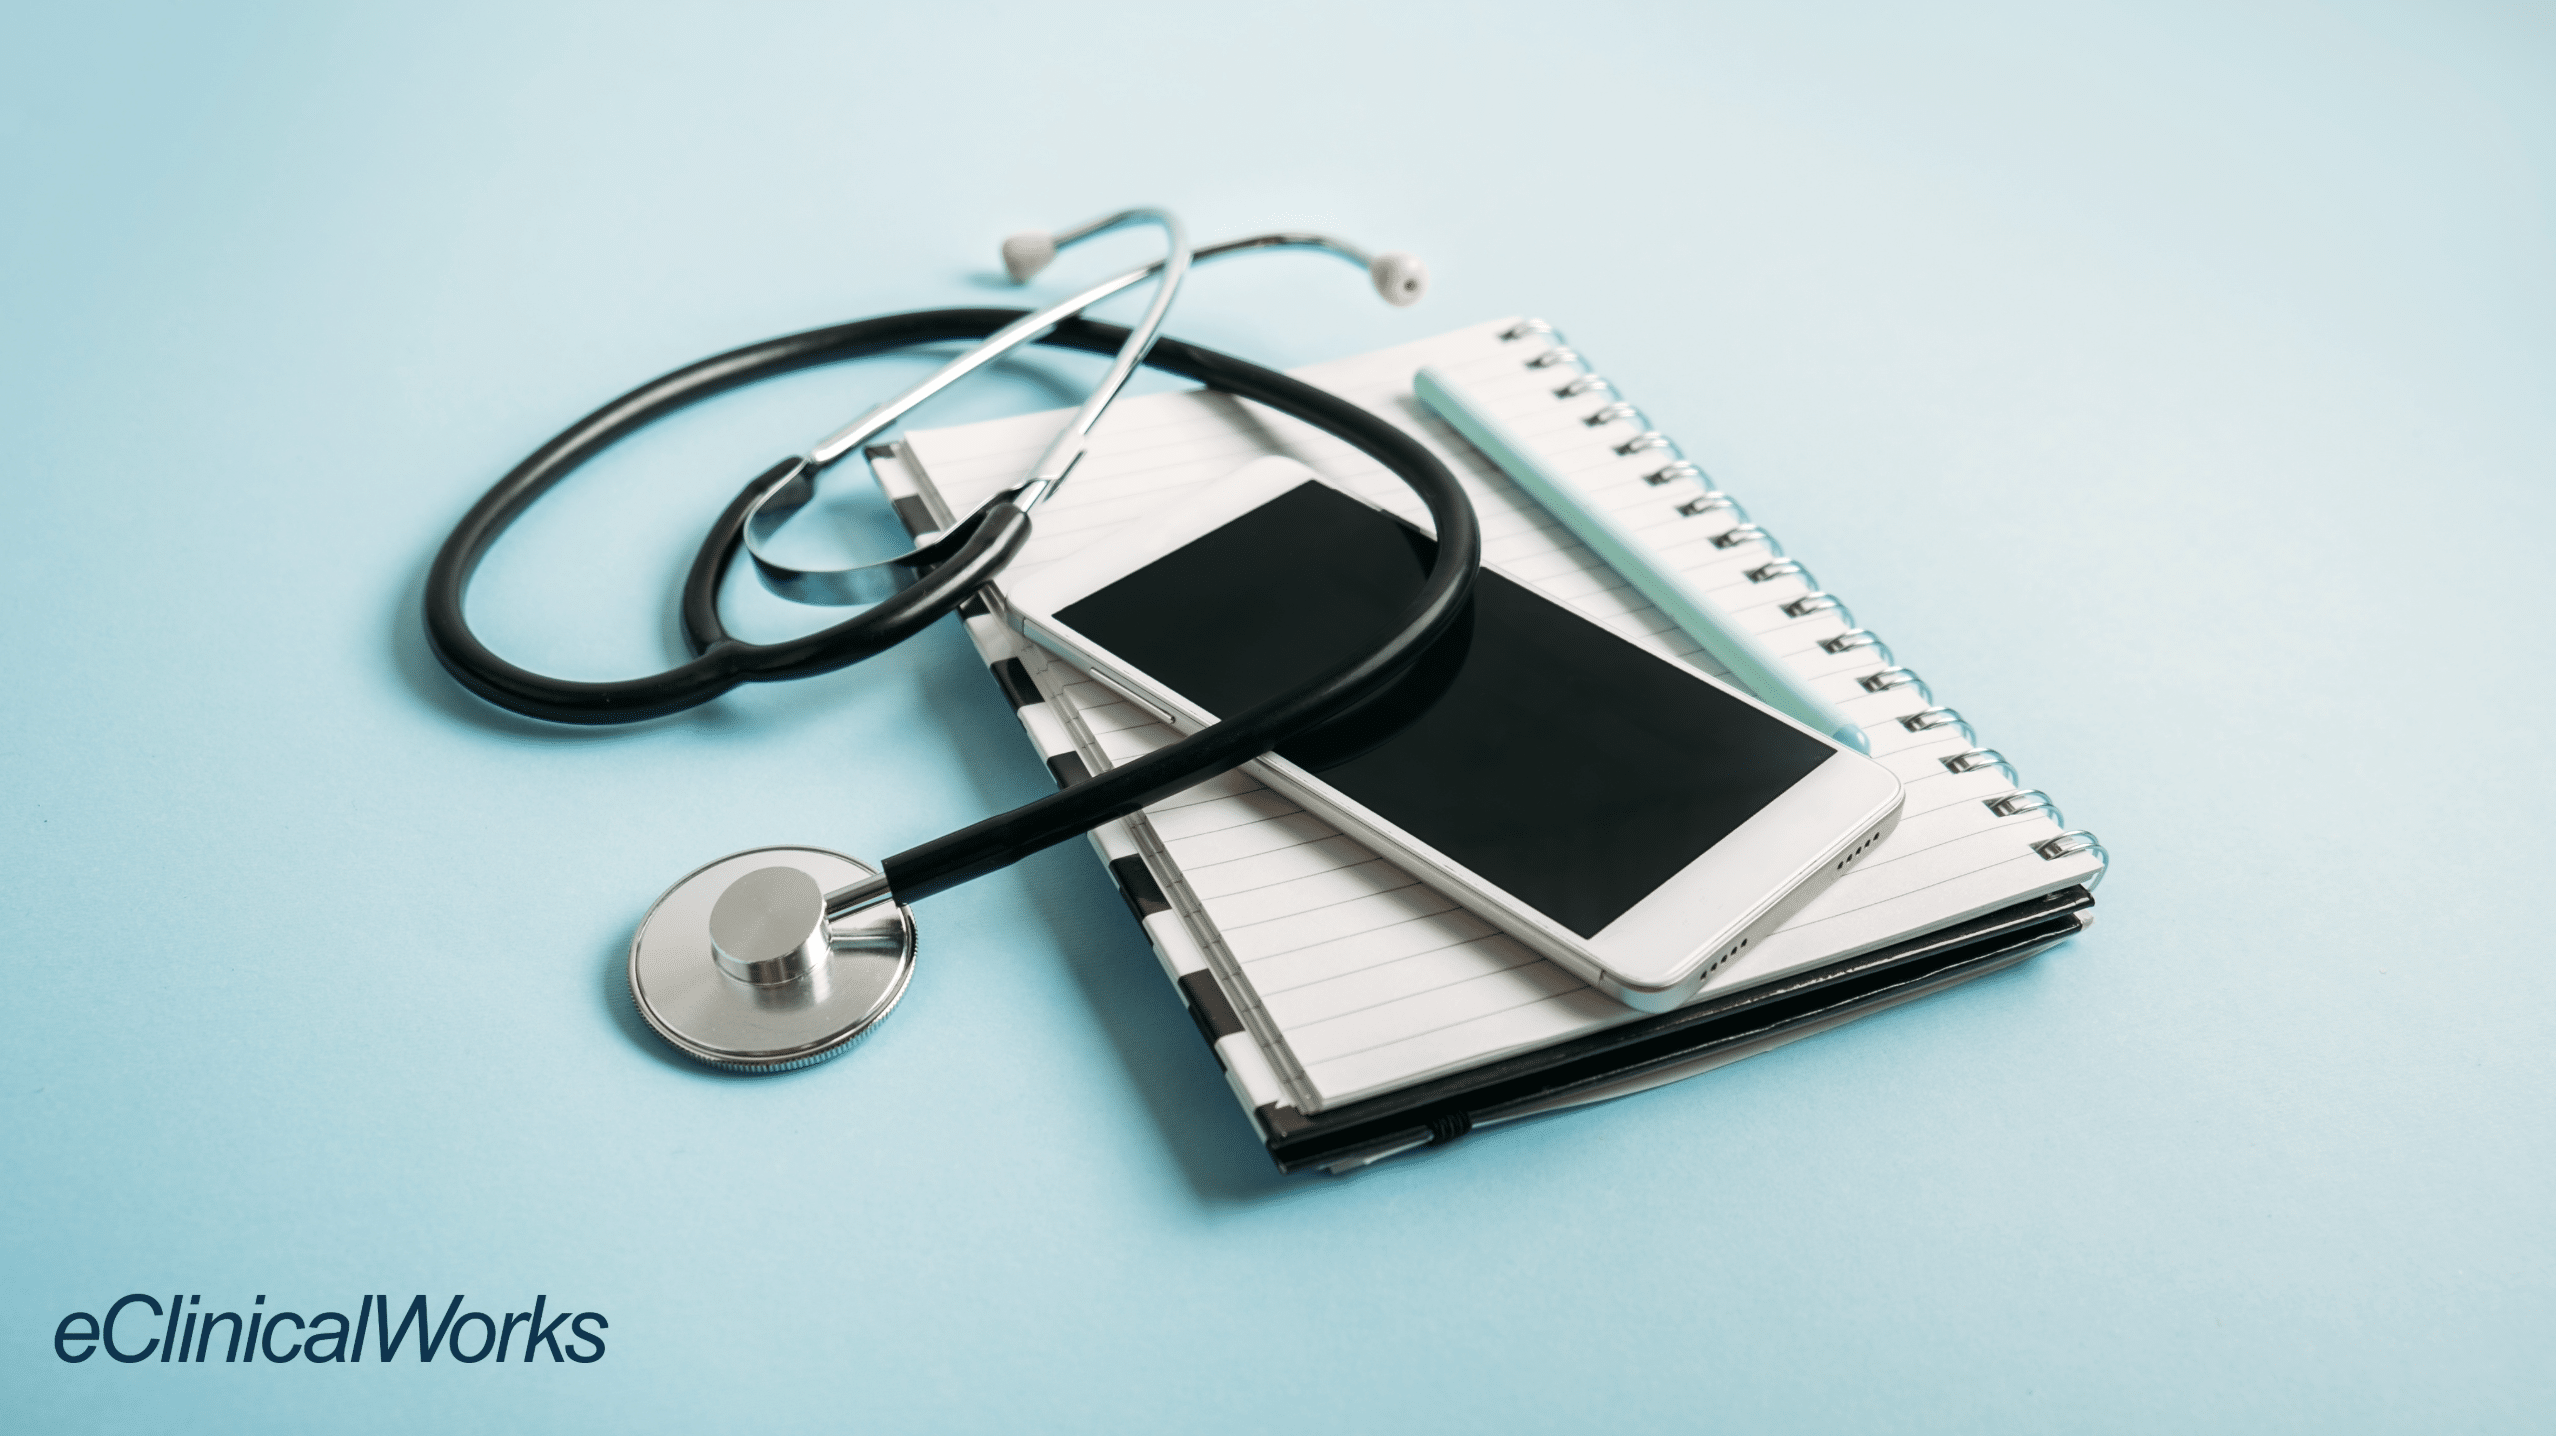 phone on top of notebook and stethoscope on top of mobile phone